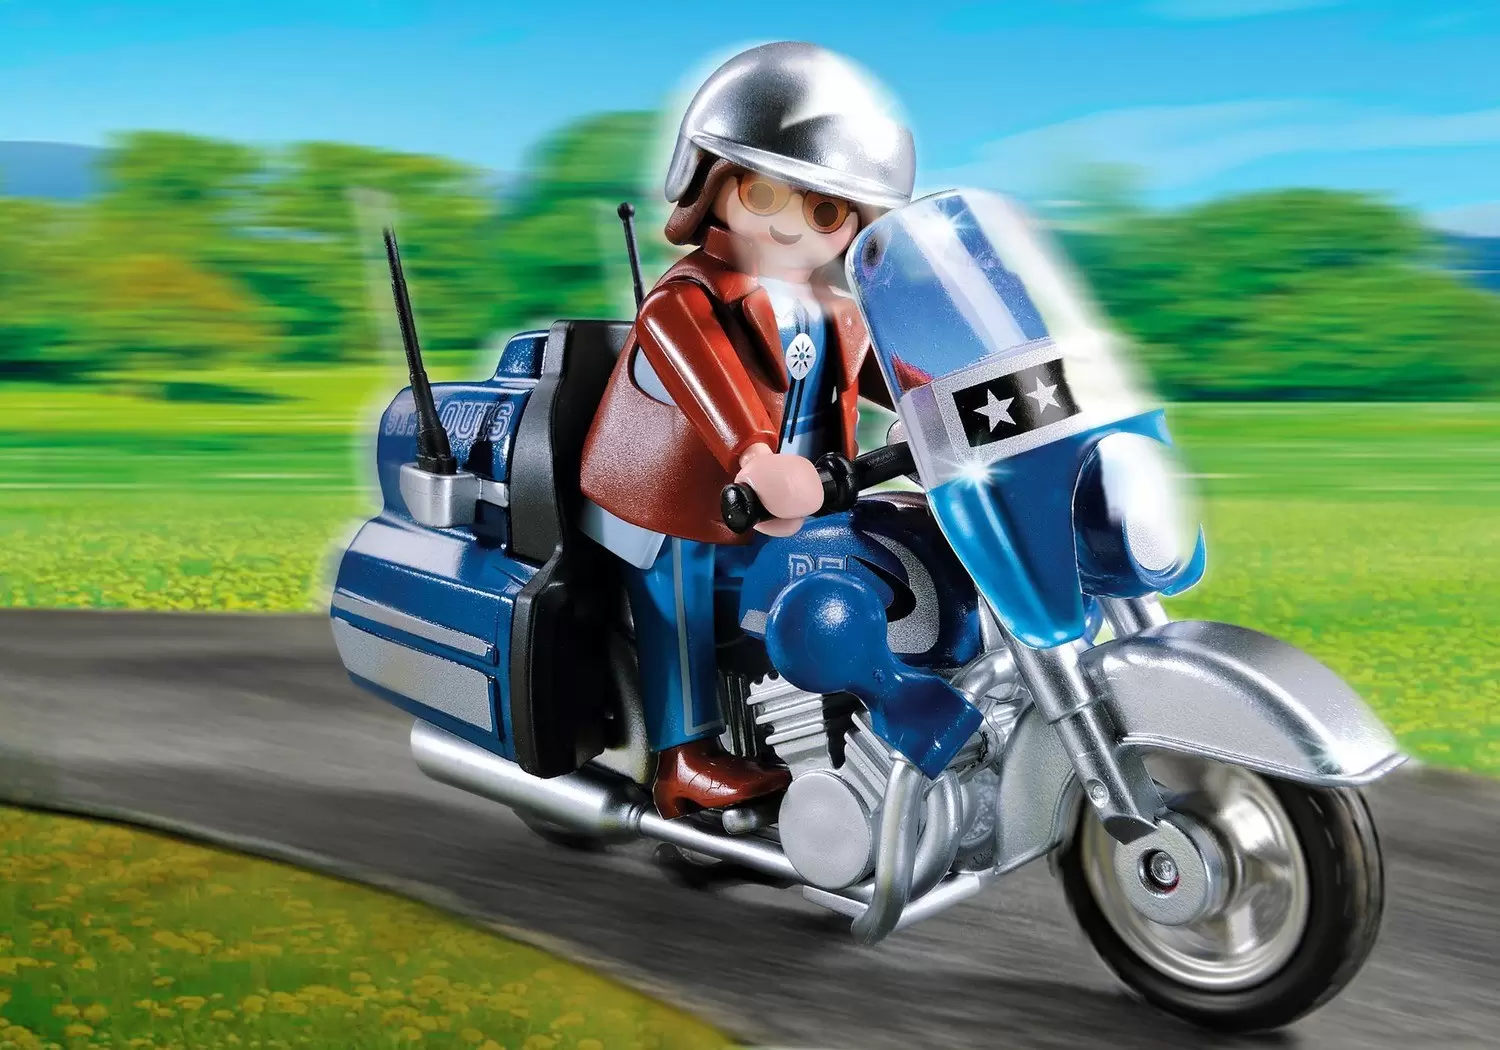 Playmobil Motor Sports - Touring Motorcycle with Rider